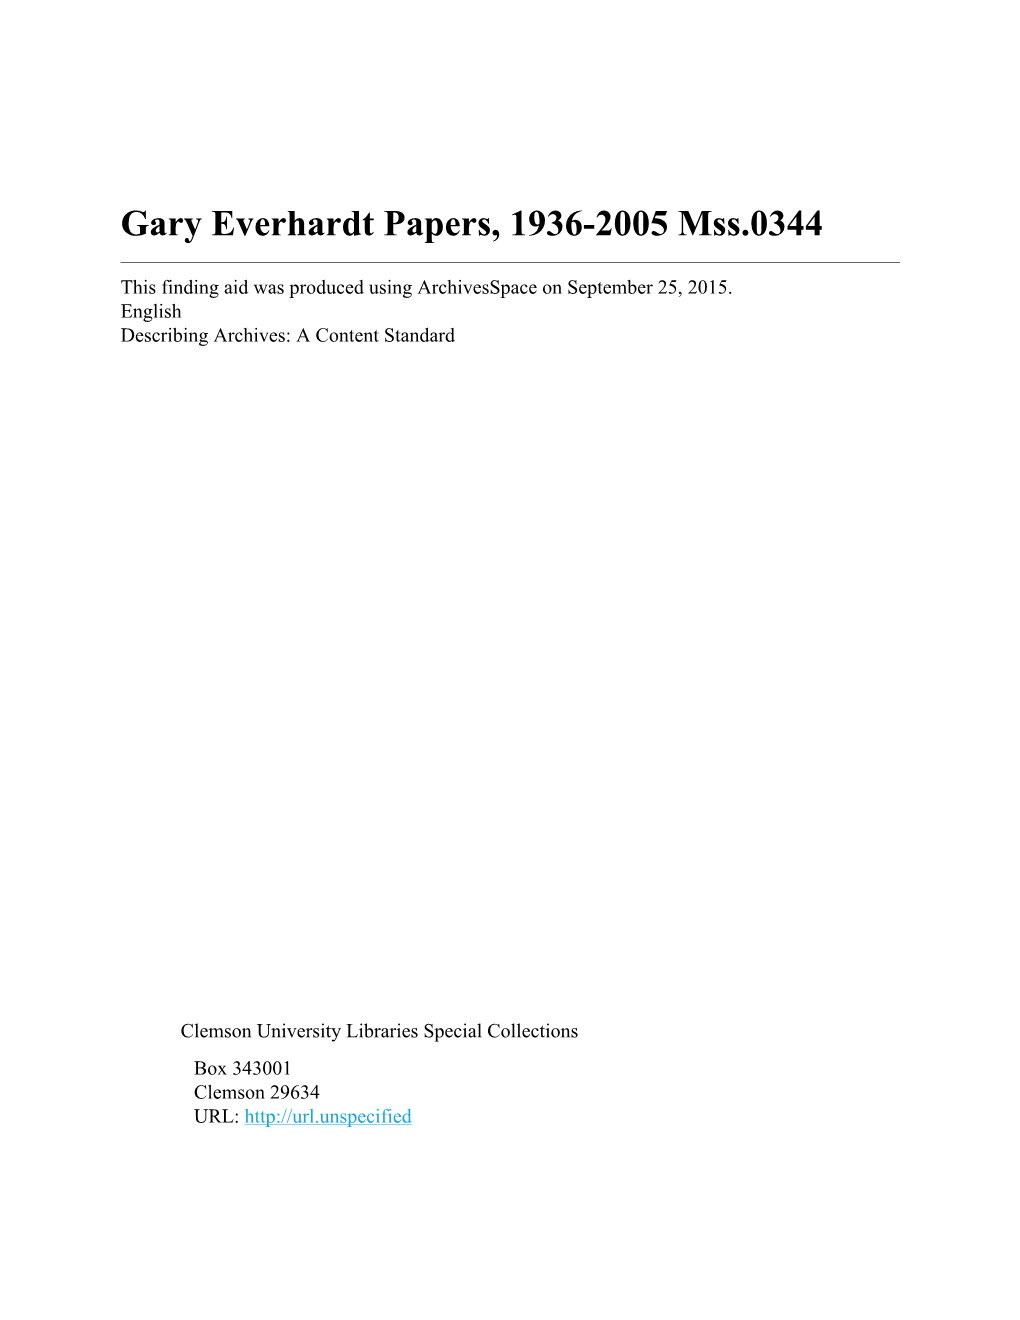 Gary Everhardt Papers, 1936-2005 Mss.0344